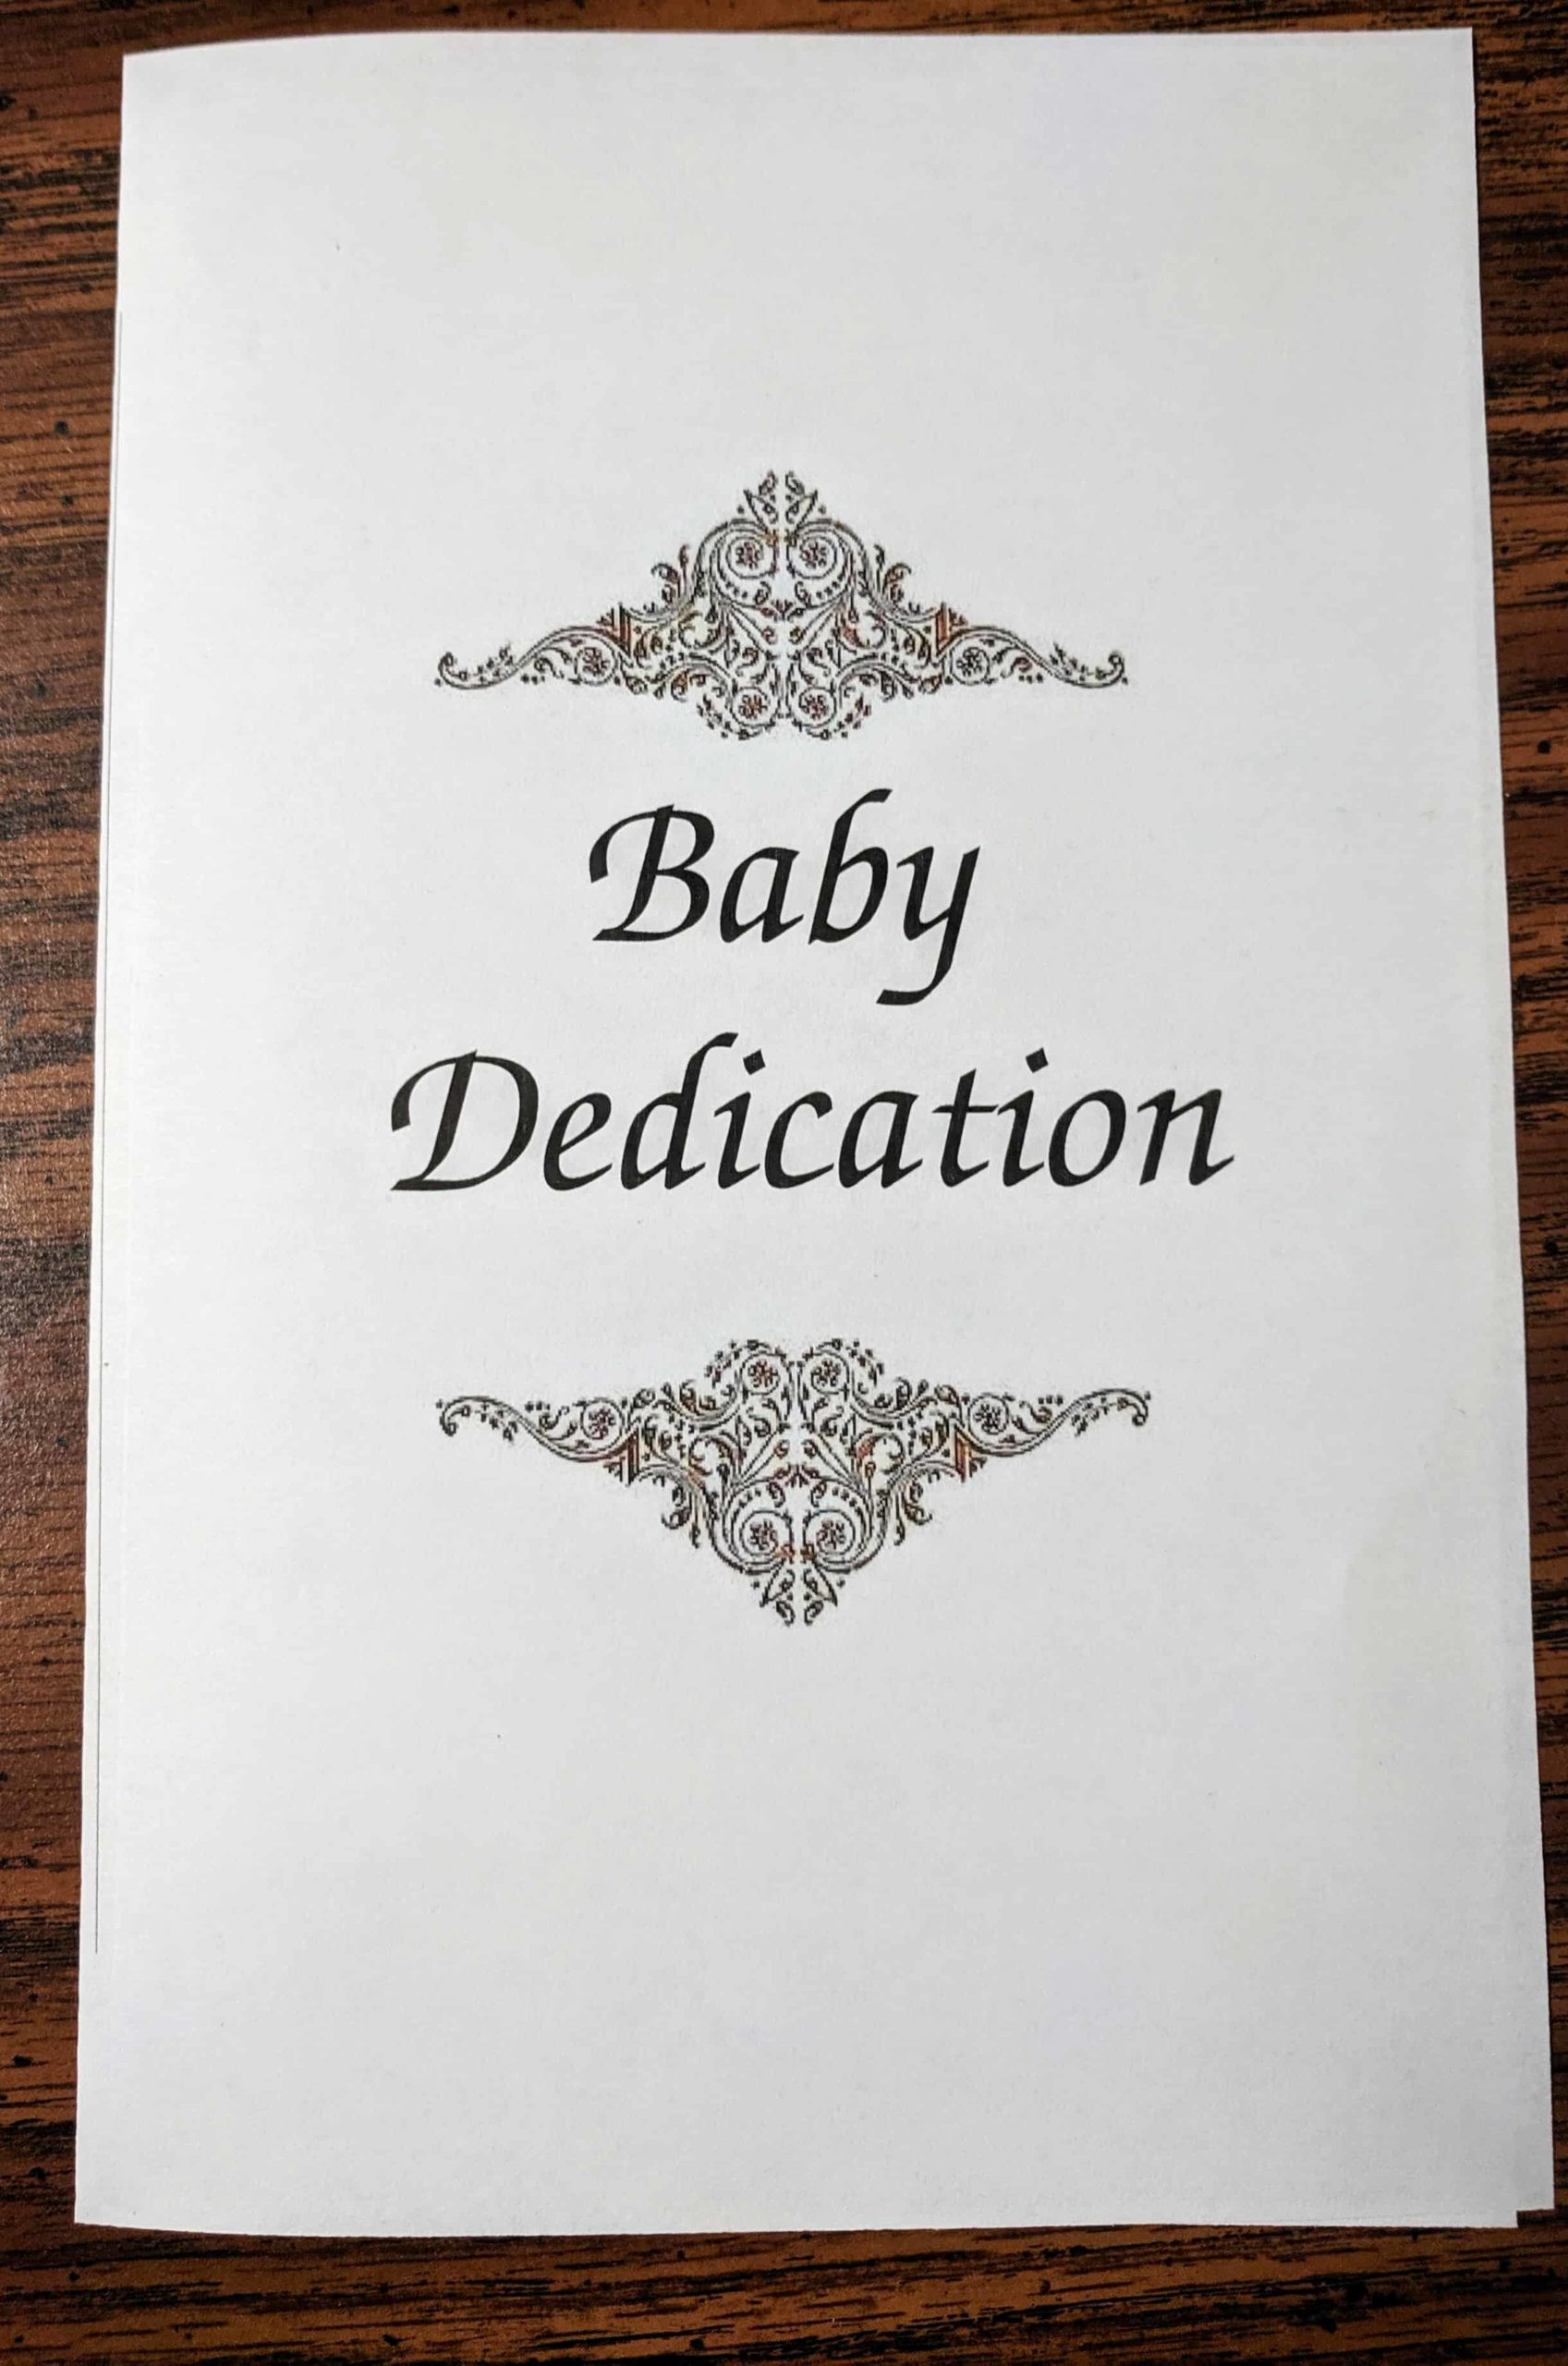 Baby Blessing Gift Ideas
 "Baby Dedication" ceremony includes prayer message